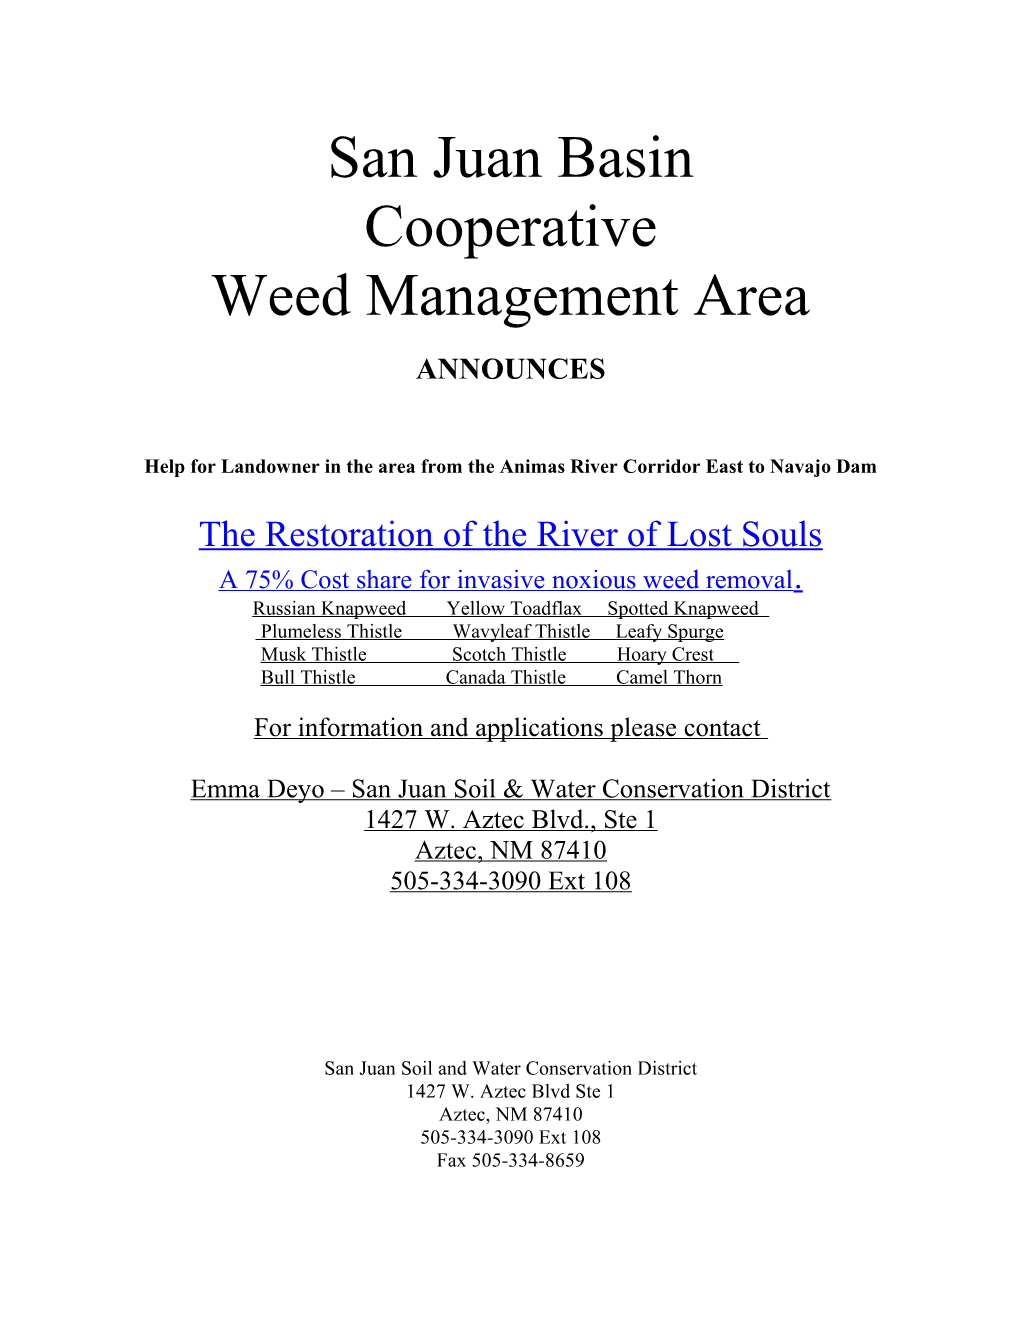 San Juan Soil and Water Conservation District